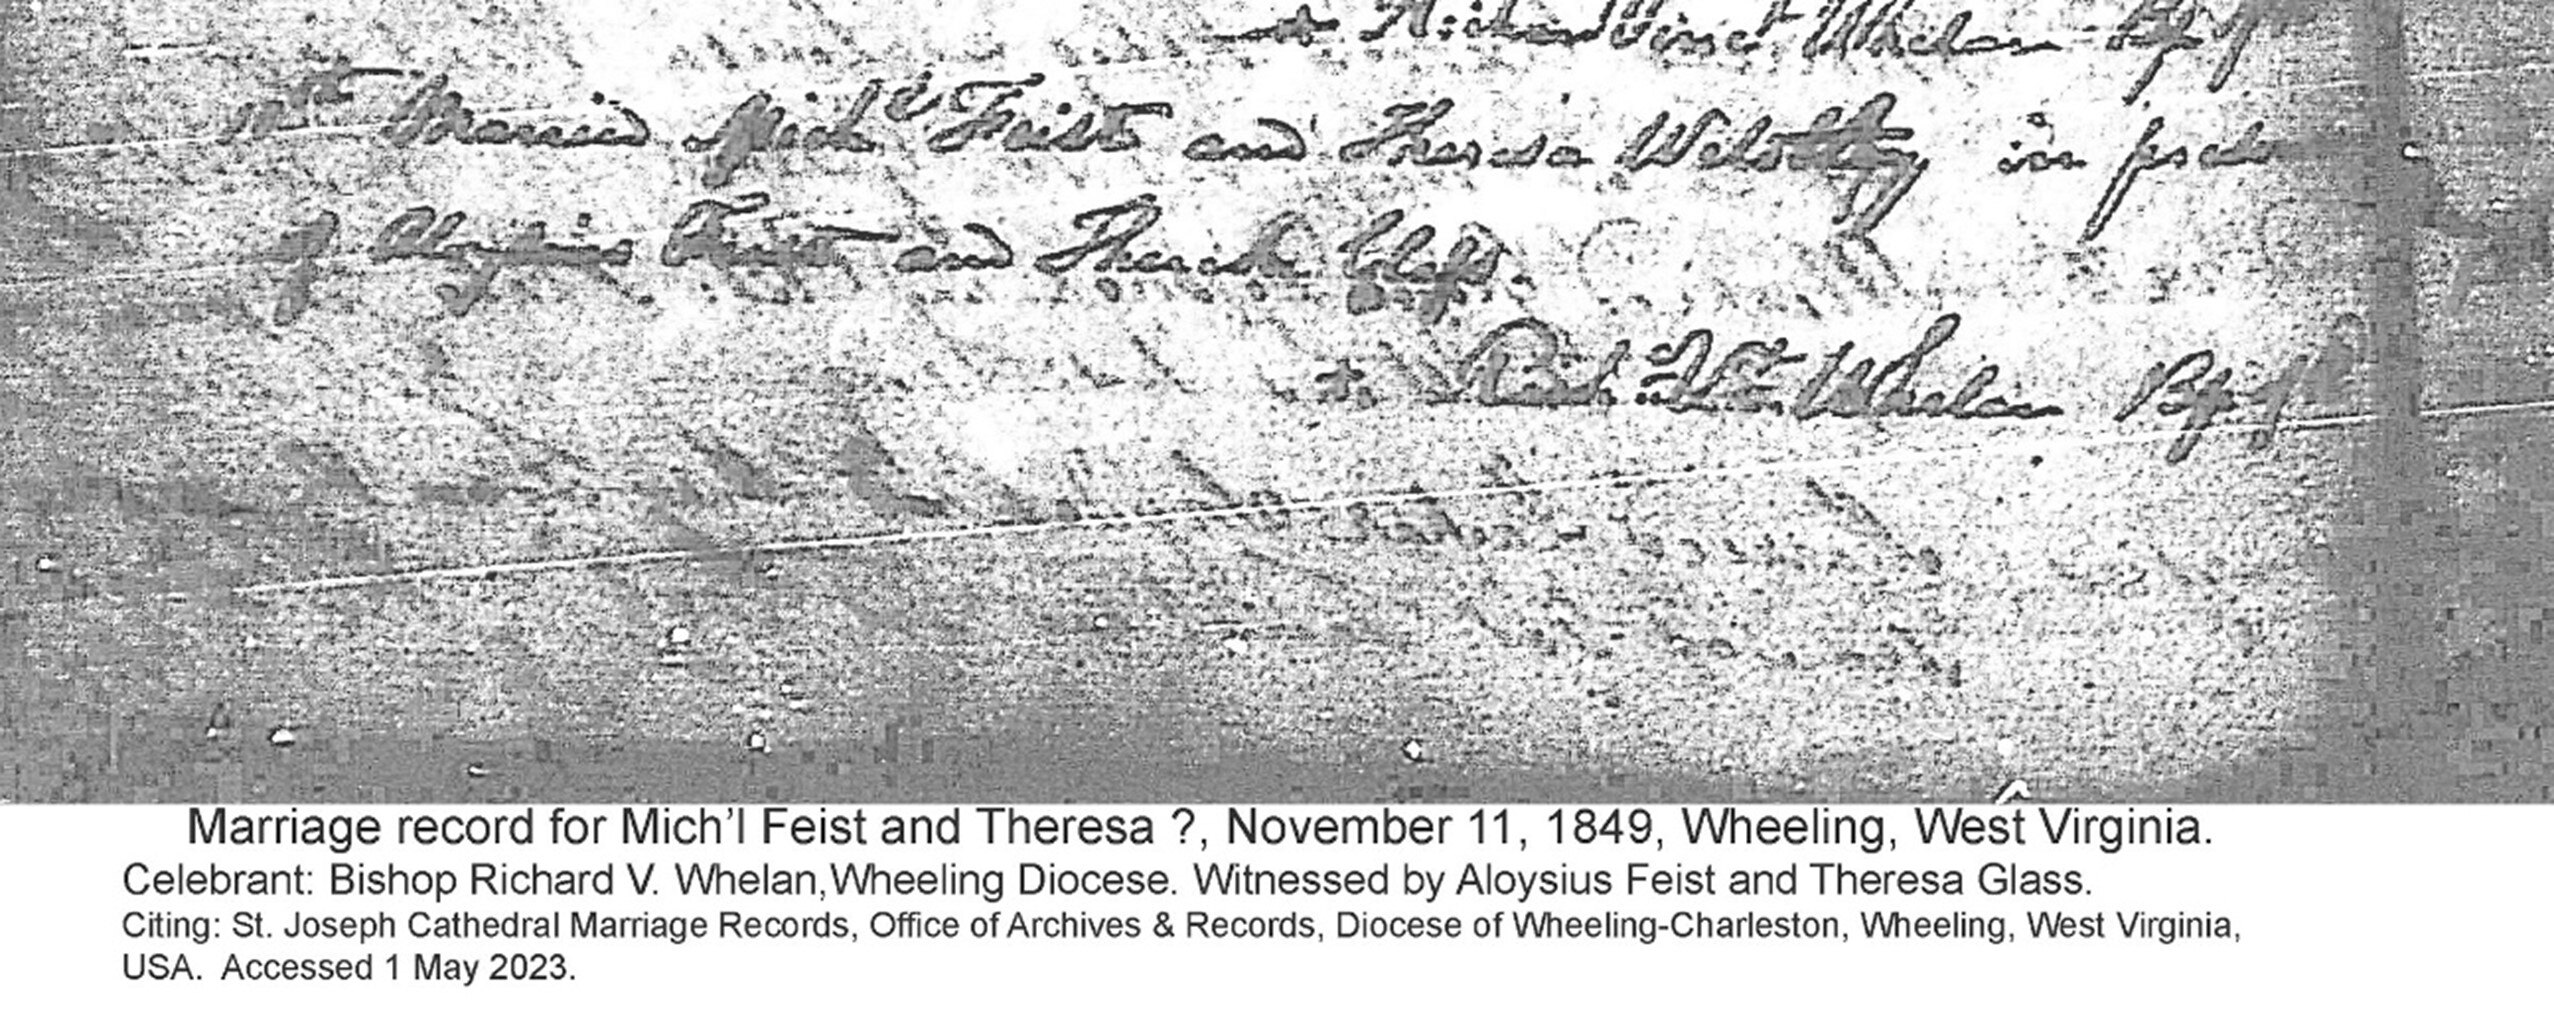 Marriage record for Mich'l Feist and Theresa ?, November 11, 1849, Wheeling, West Virginia. Celebrant: Bishop Richard V. Whelan, Wheeling Diocese. Witnessed by Aloysius Feist and Theresa Glass. Citing: St. Joseph Cathedral Marriage Records, Office of Archives & Records, Diocese of Wheeling-Charleston, Wheeling, West Virginia, USA. Accessed 1 May 2023.